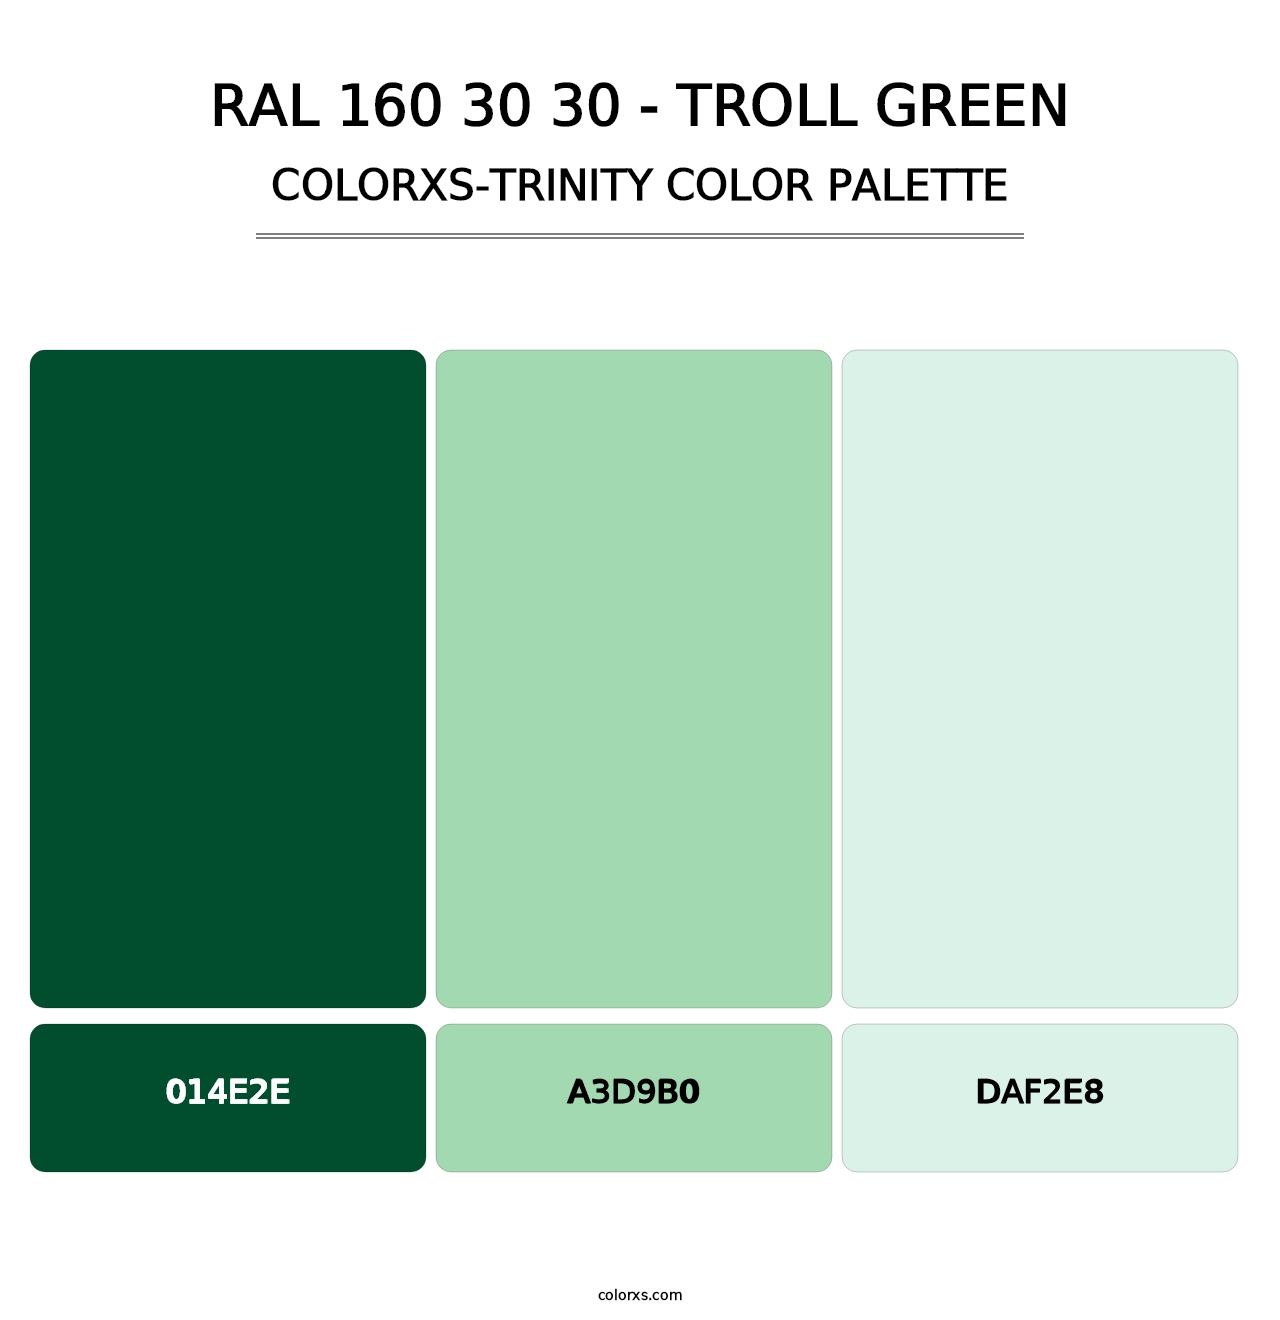 RAL 160 30 30 - Troll Green - Colorxs Trinity Palette